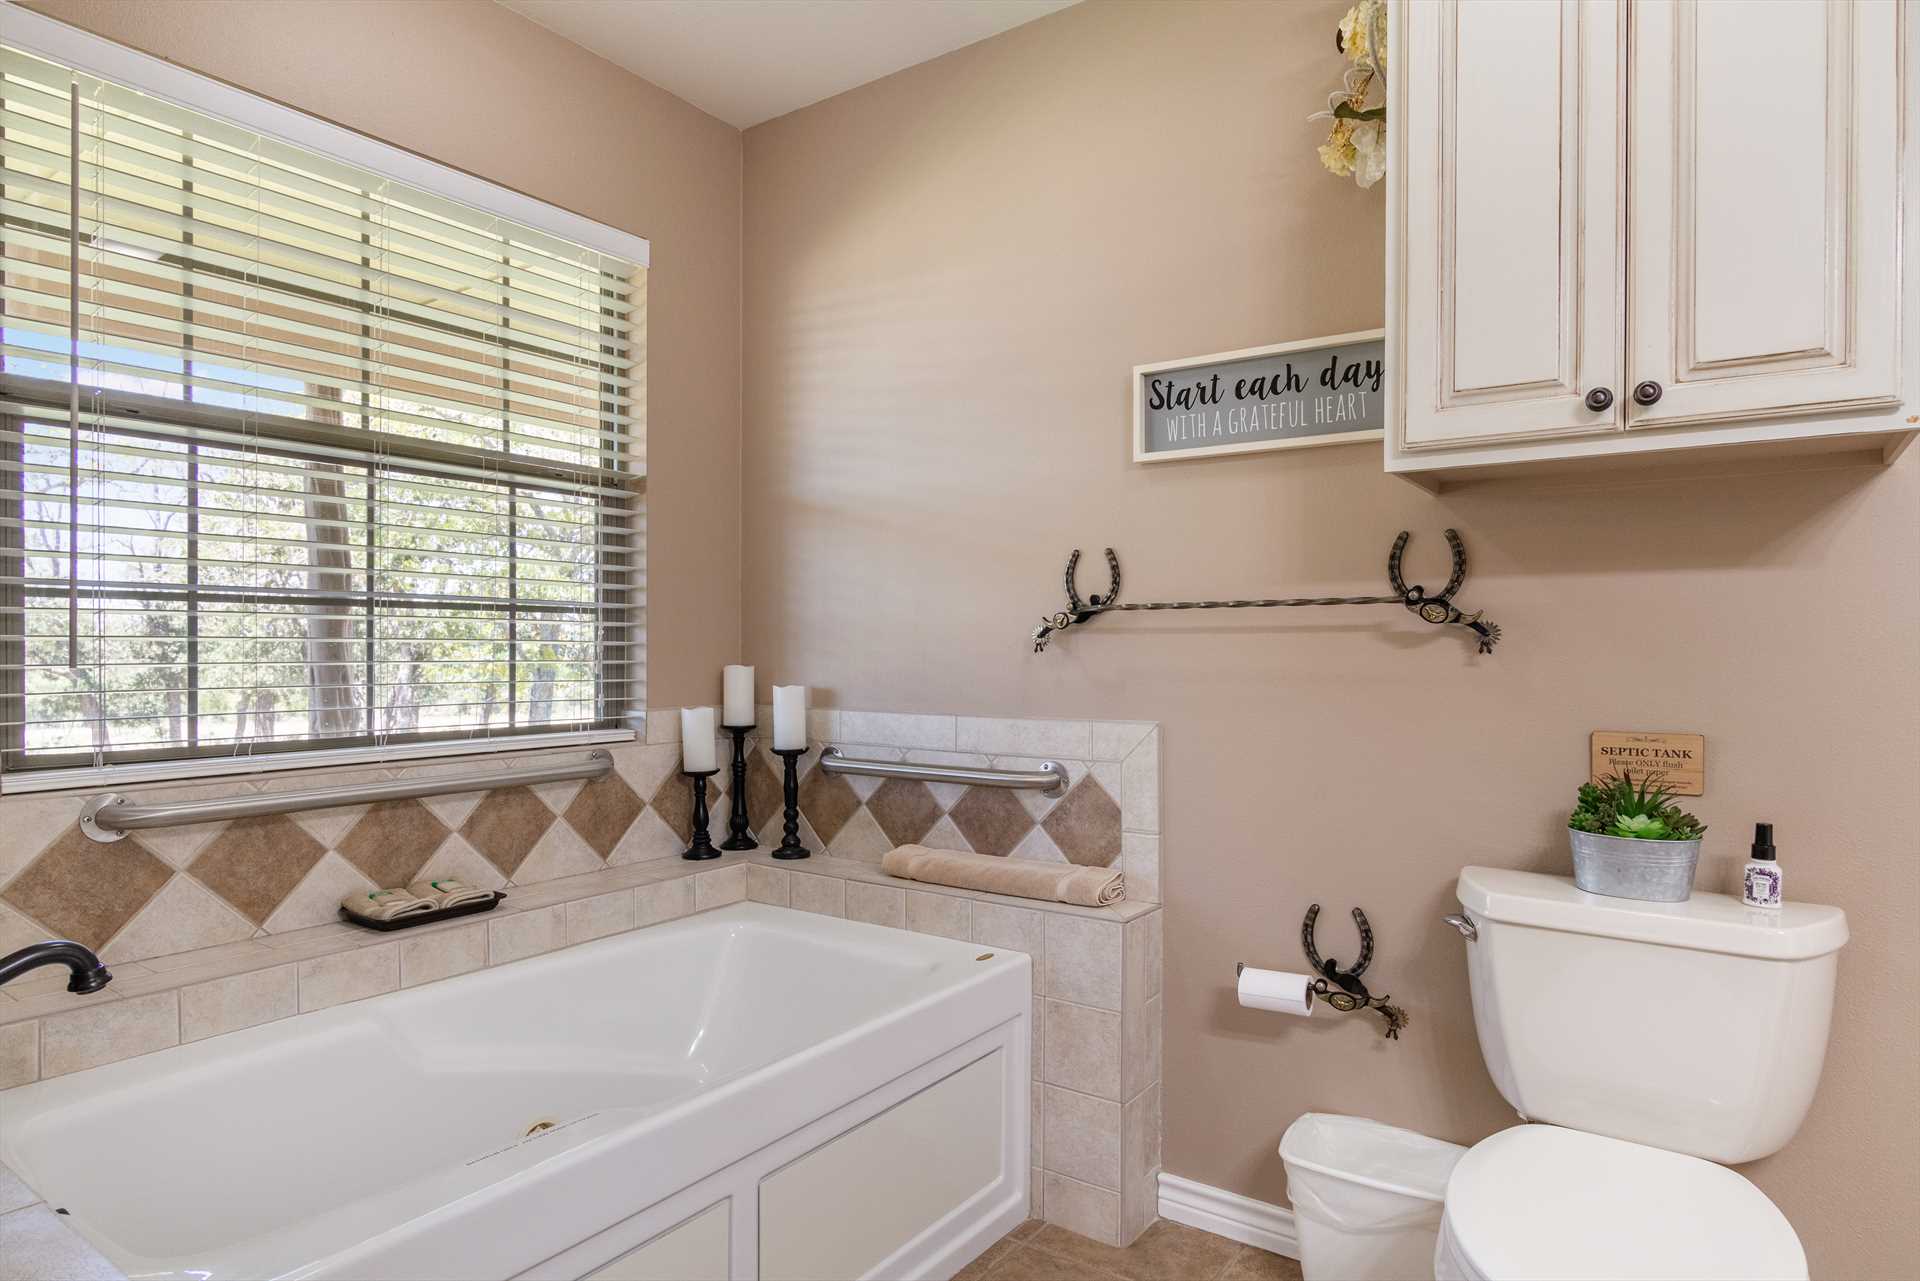                                                 Essential toiletries and clean linens can be found in all the bath spaces at Omie's.